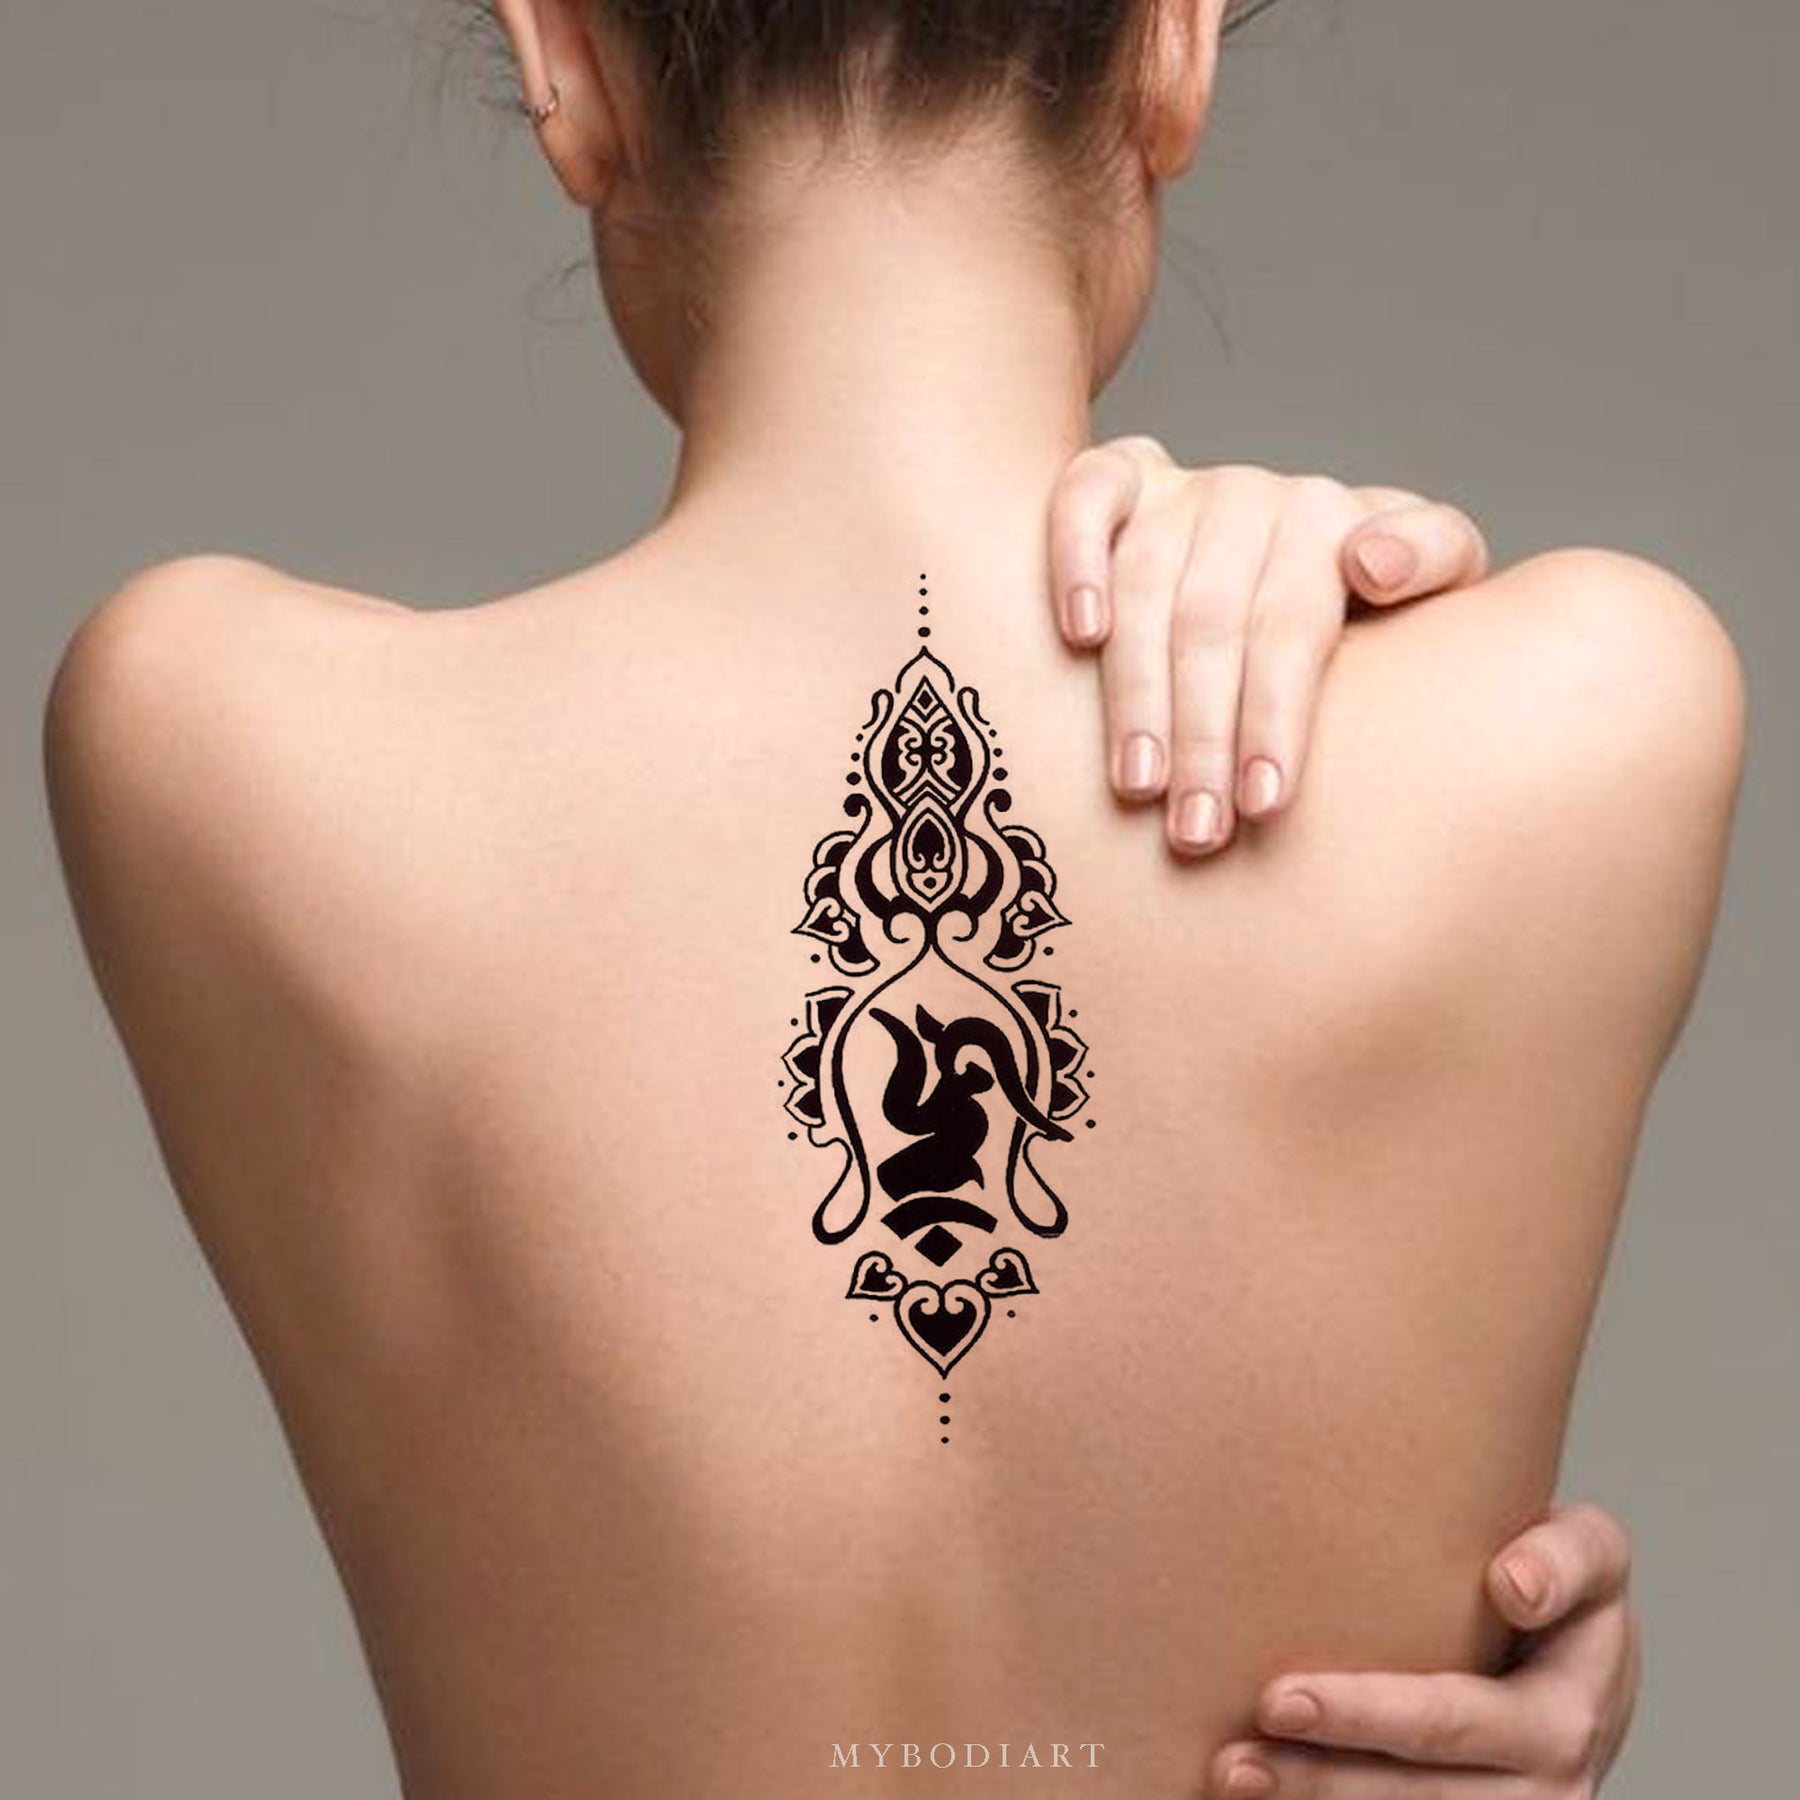 TATTOO MEANING 🔴 In Buddhism the unalome symbol represents the path to  enlightenment. The spiral characterizes the beginning of a per... |  Instagram